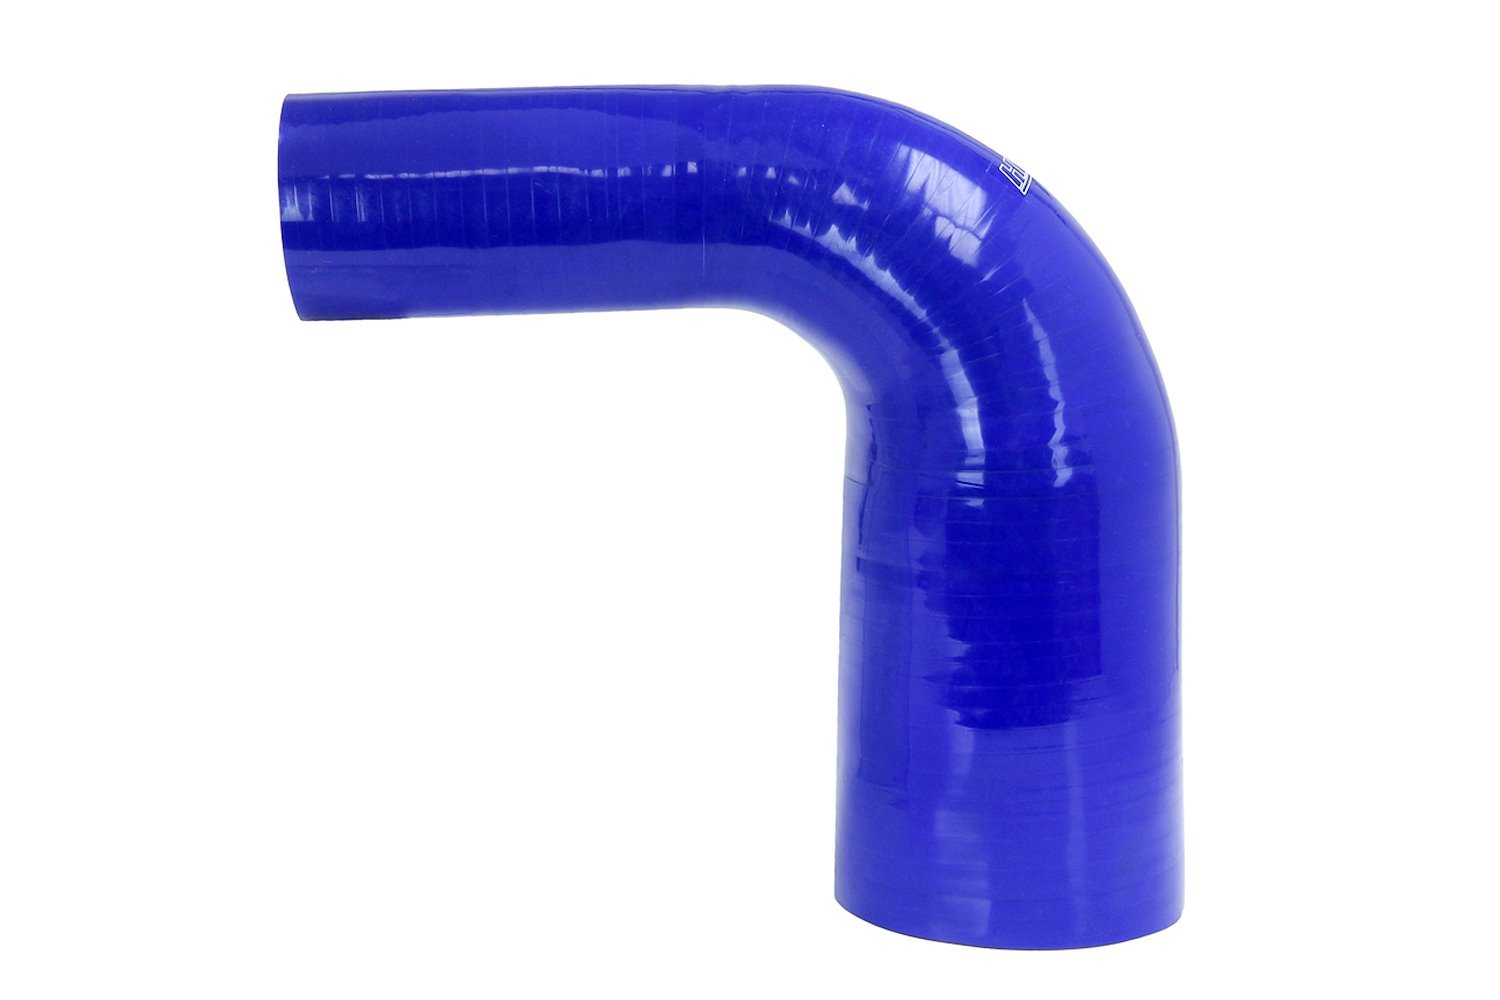 HTSER90-250-325-BLUE Silicone 90-Degree Elbow Hose, High-Temp 4-Ply Reinforced, 2-1/2 in. - 3-1/4 in. ID, Blue